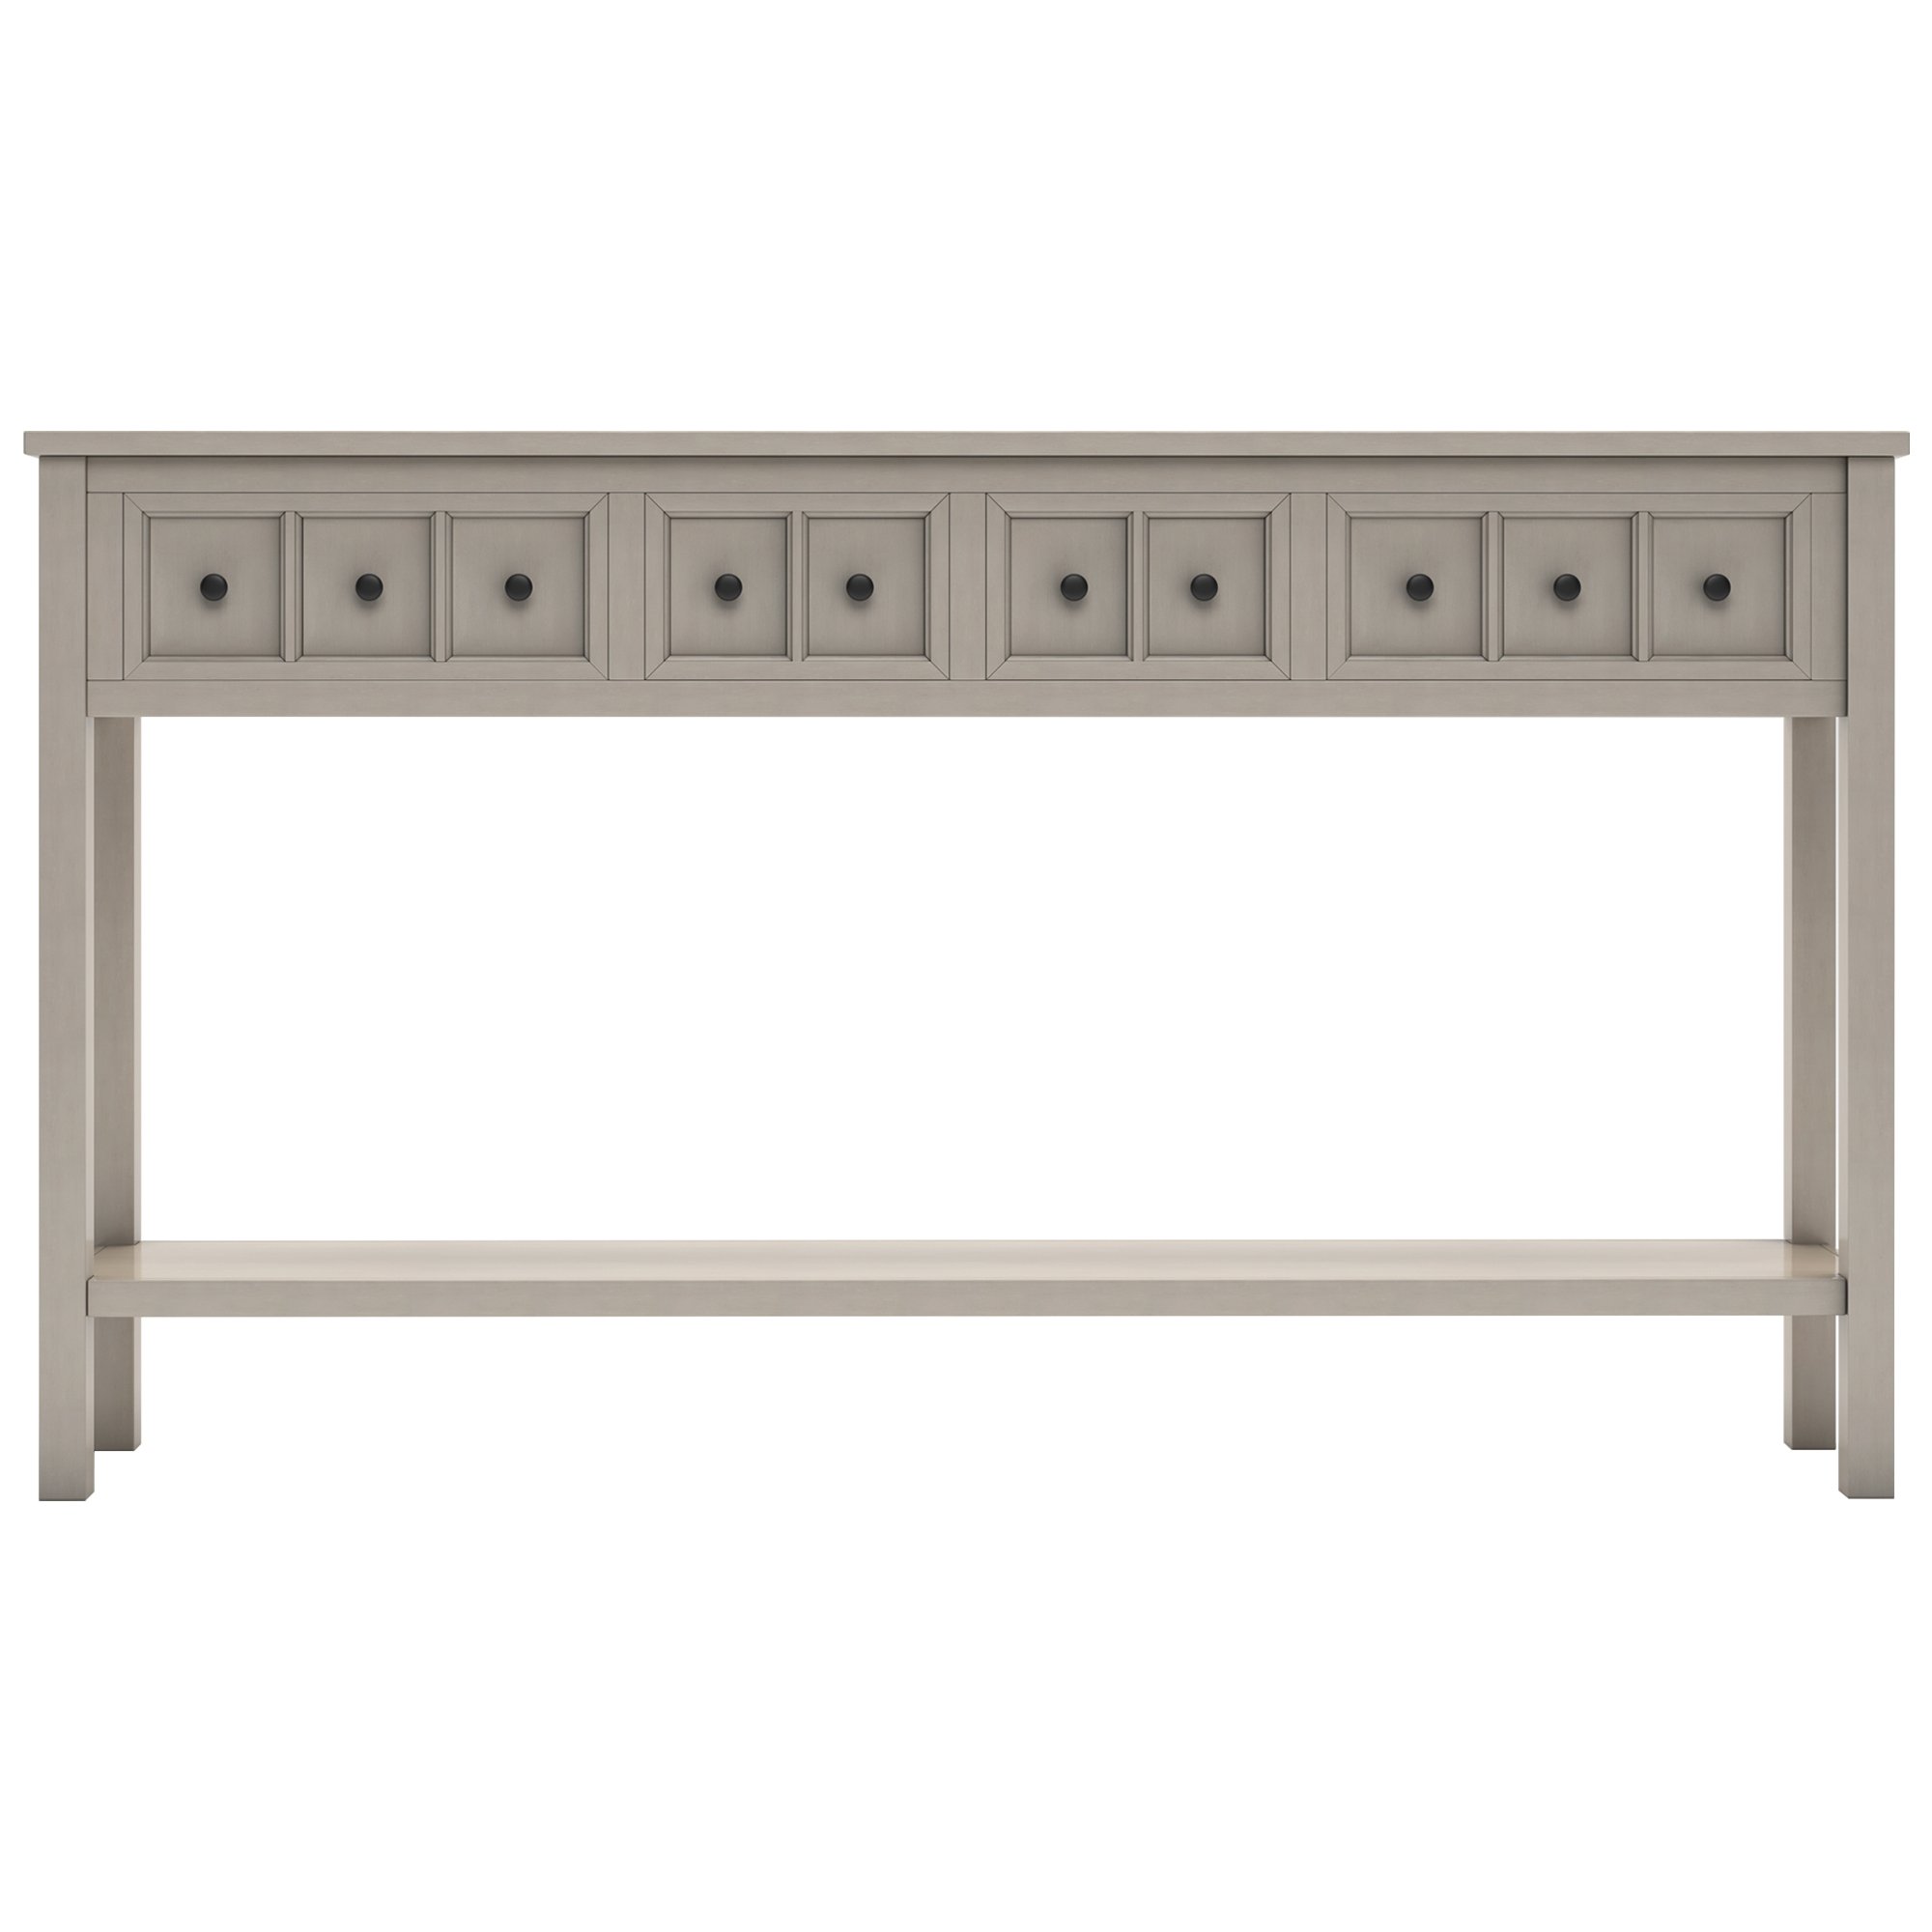 Rustic Entryway Console Table, 60" Long Sofa Table with two Different Size Drawers and Bottom Shelf for Storage (Gray Wash)-CASAINC